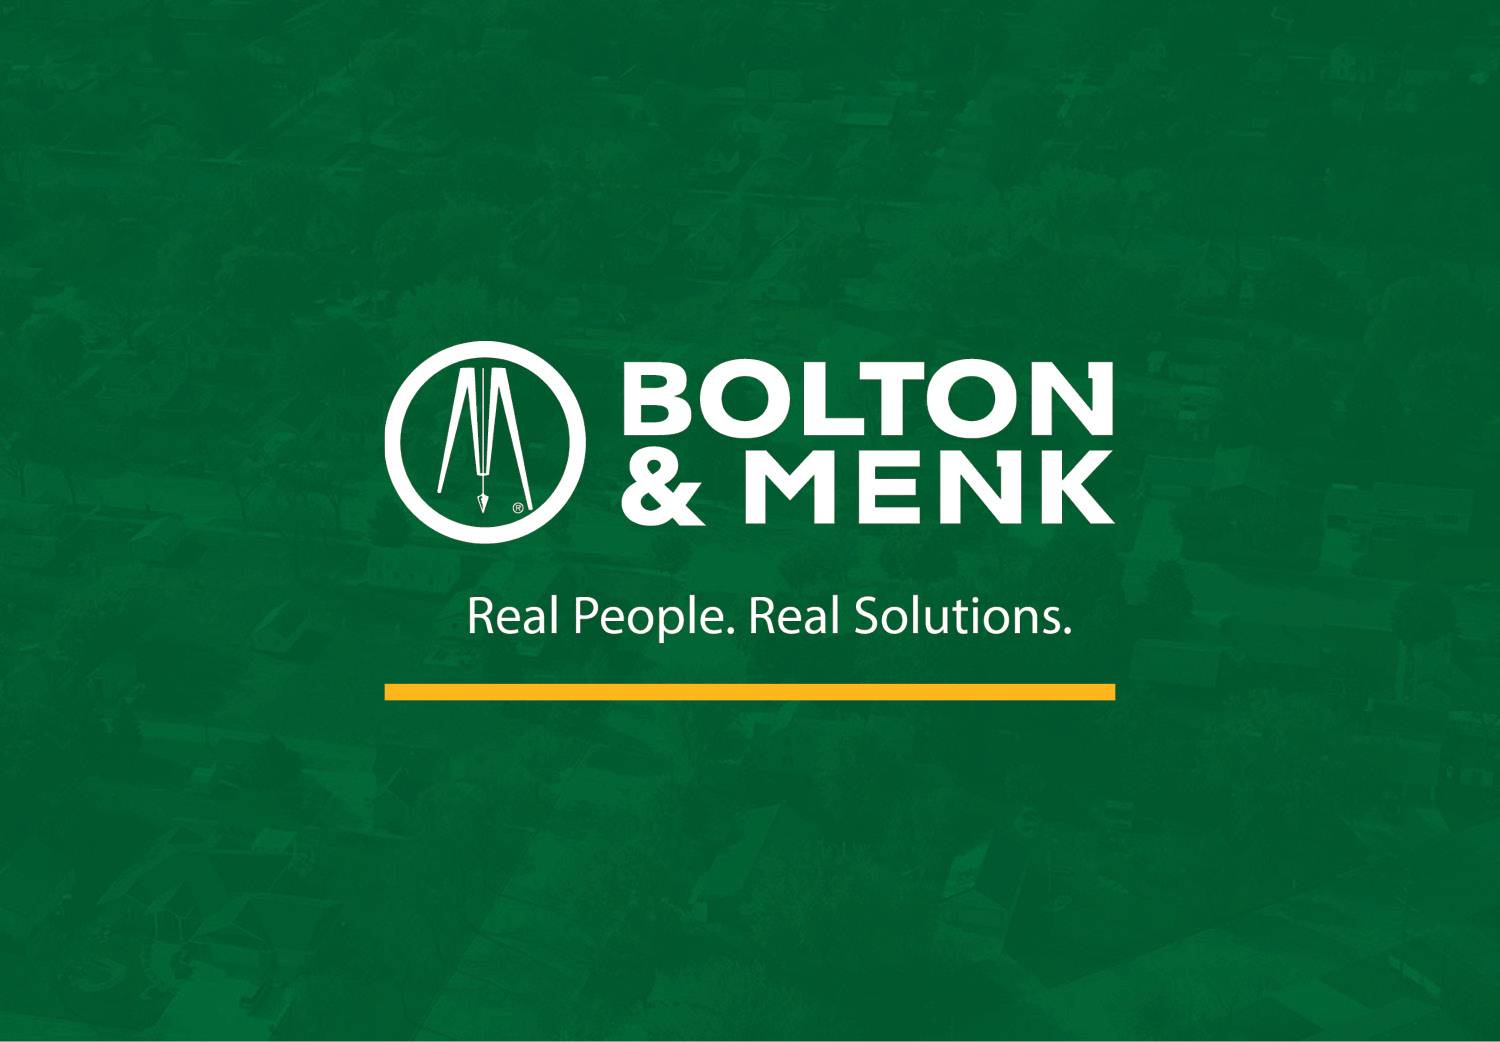 Bolton & Menk Listed as Top 200 Workplace in Minnesota